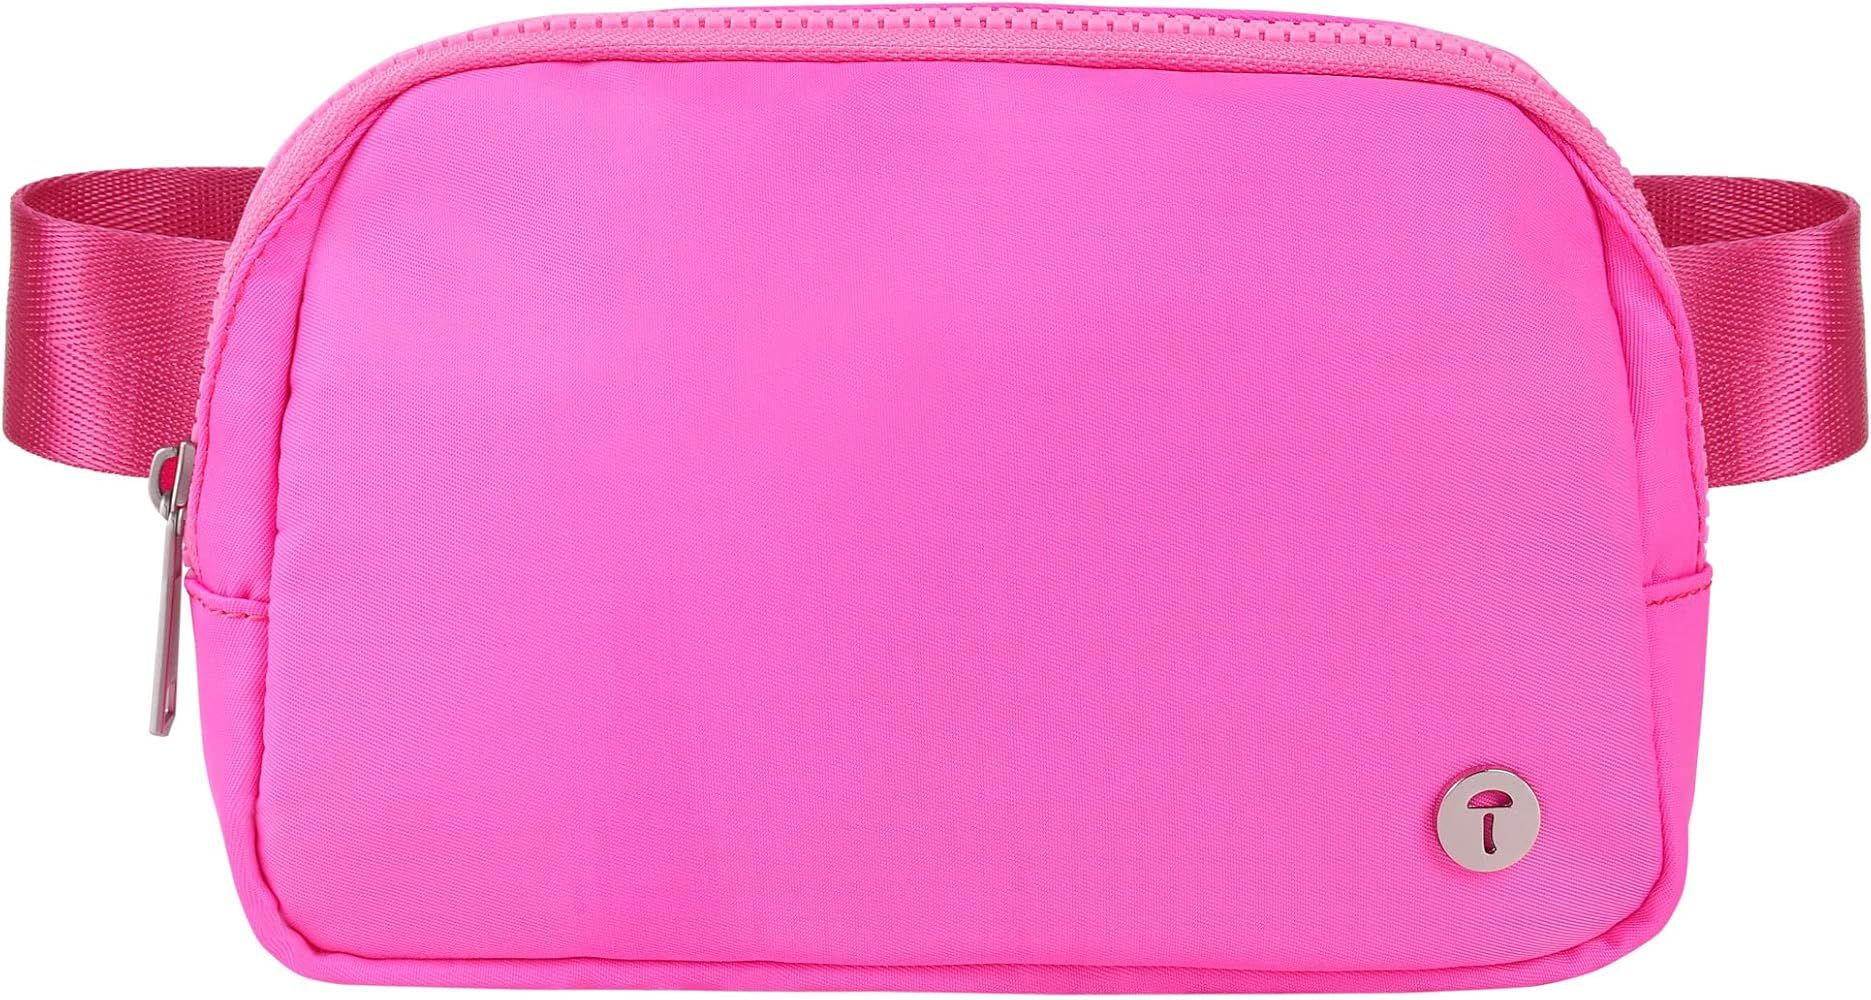 Belt Bag for Women Fanny Pack With Adjustable Strap Water Proof Hot Magenta | Amazon (US)